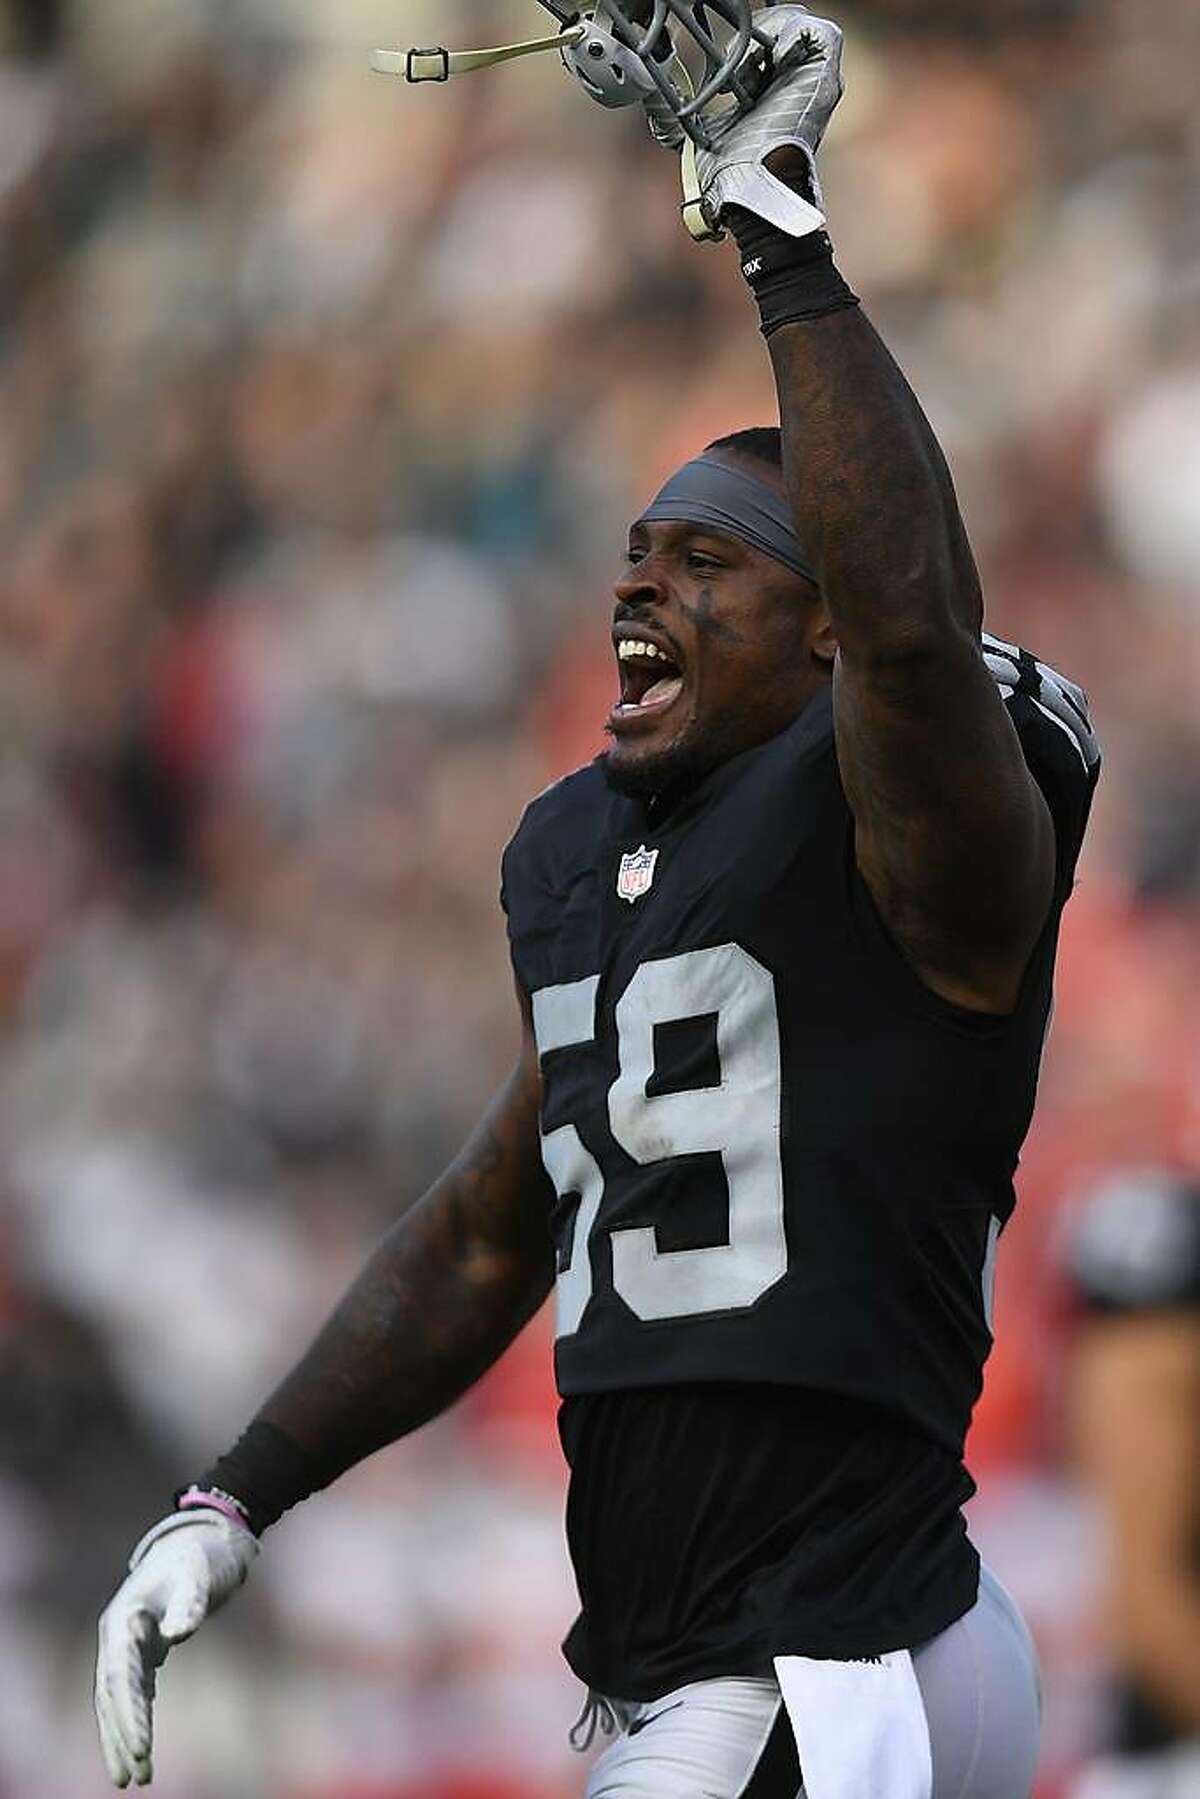 OAKLAND, CA - DECEMBER 02: Tahir Whitehead #59 of the Oakland Raiders celebrates after a play against the Kansas City Chiefs during their NFL game at Oakland-Alameda County Coliseum on December 2, 2018 in Oakland, California. (Photo by Thearon W. Henderson/Getty Images)